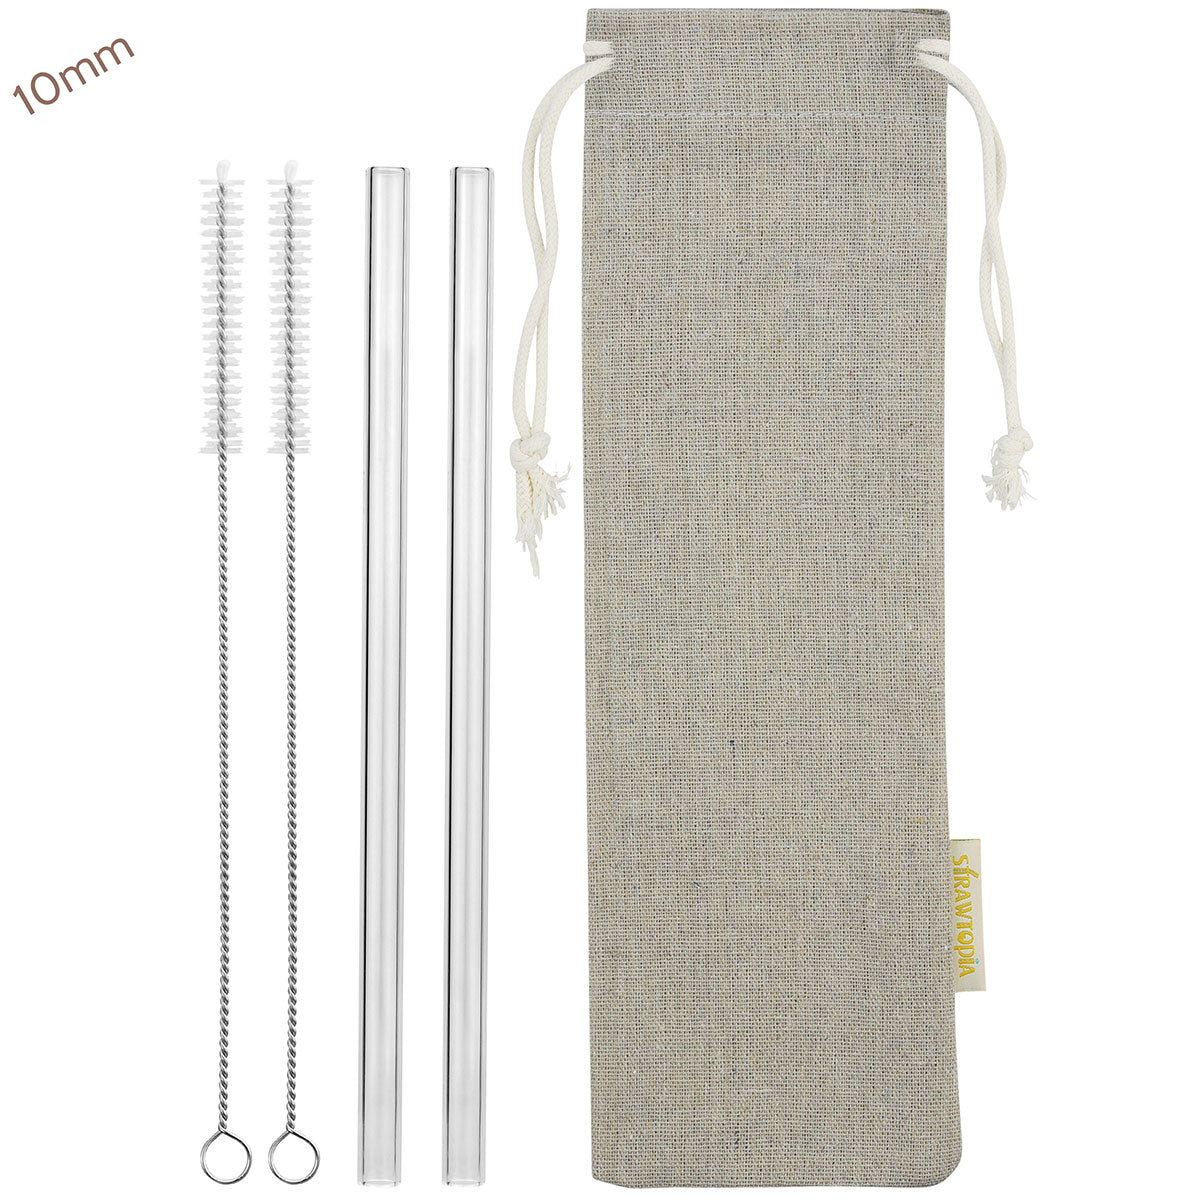 2 Pk Glass Straws With Dots Eco-friendly Reusable, Lifetime Guaranteed With  Cleaning Brush Included & Dishwasher Safe 